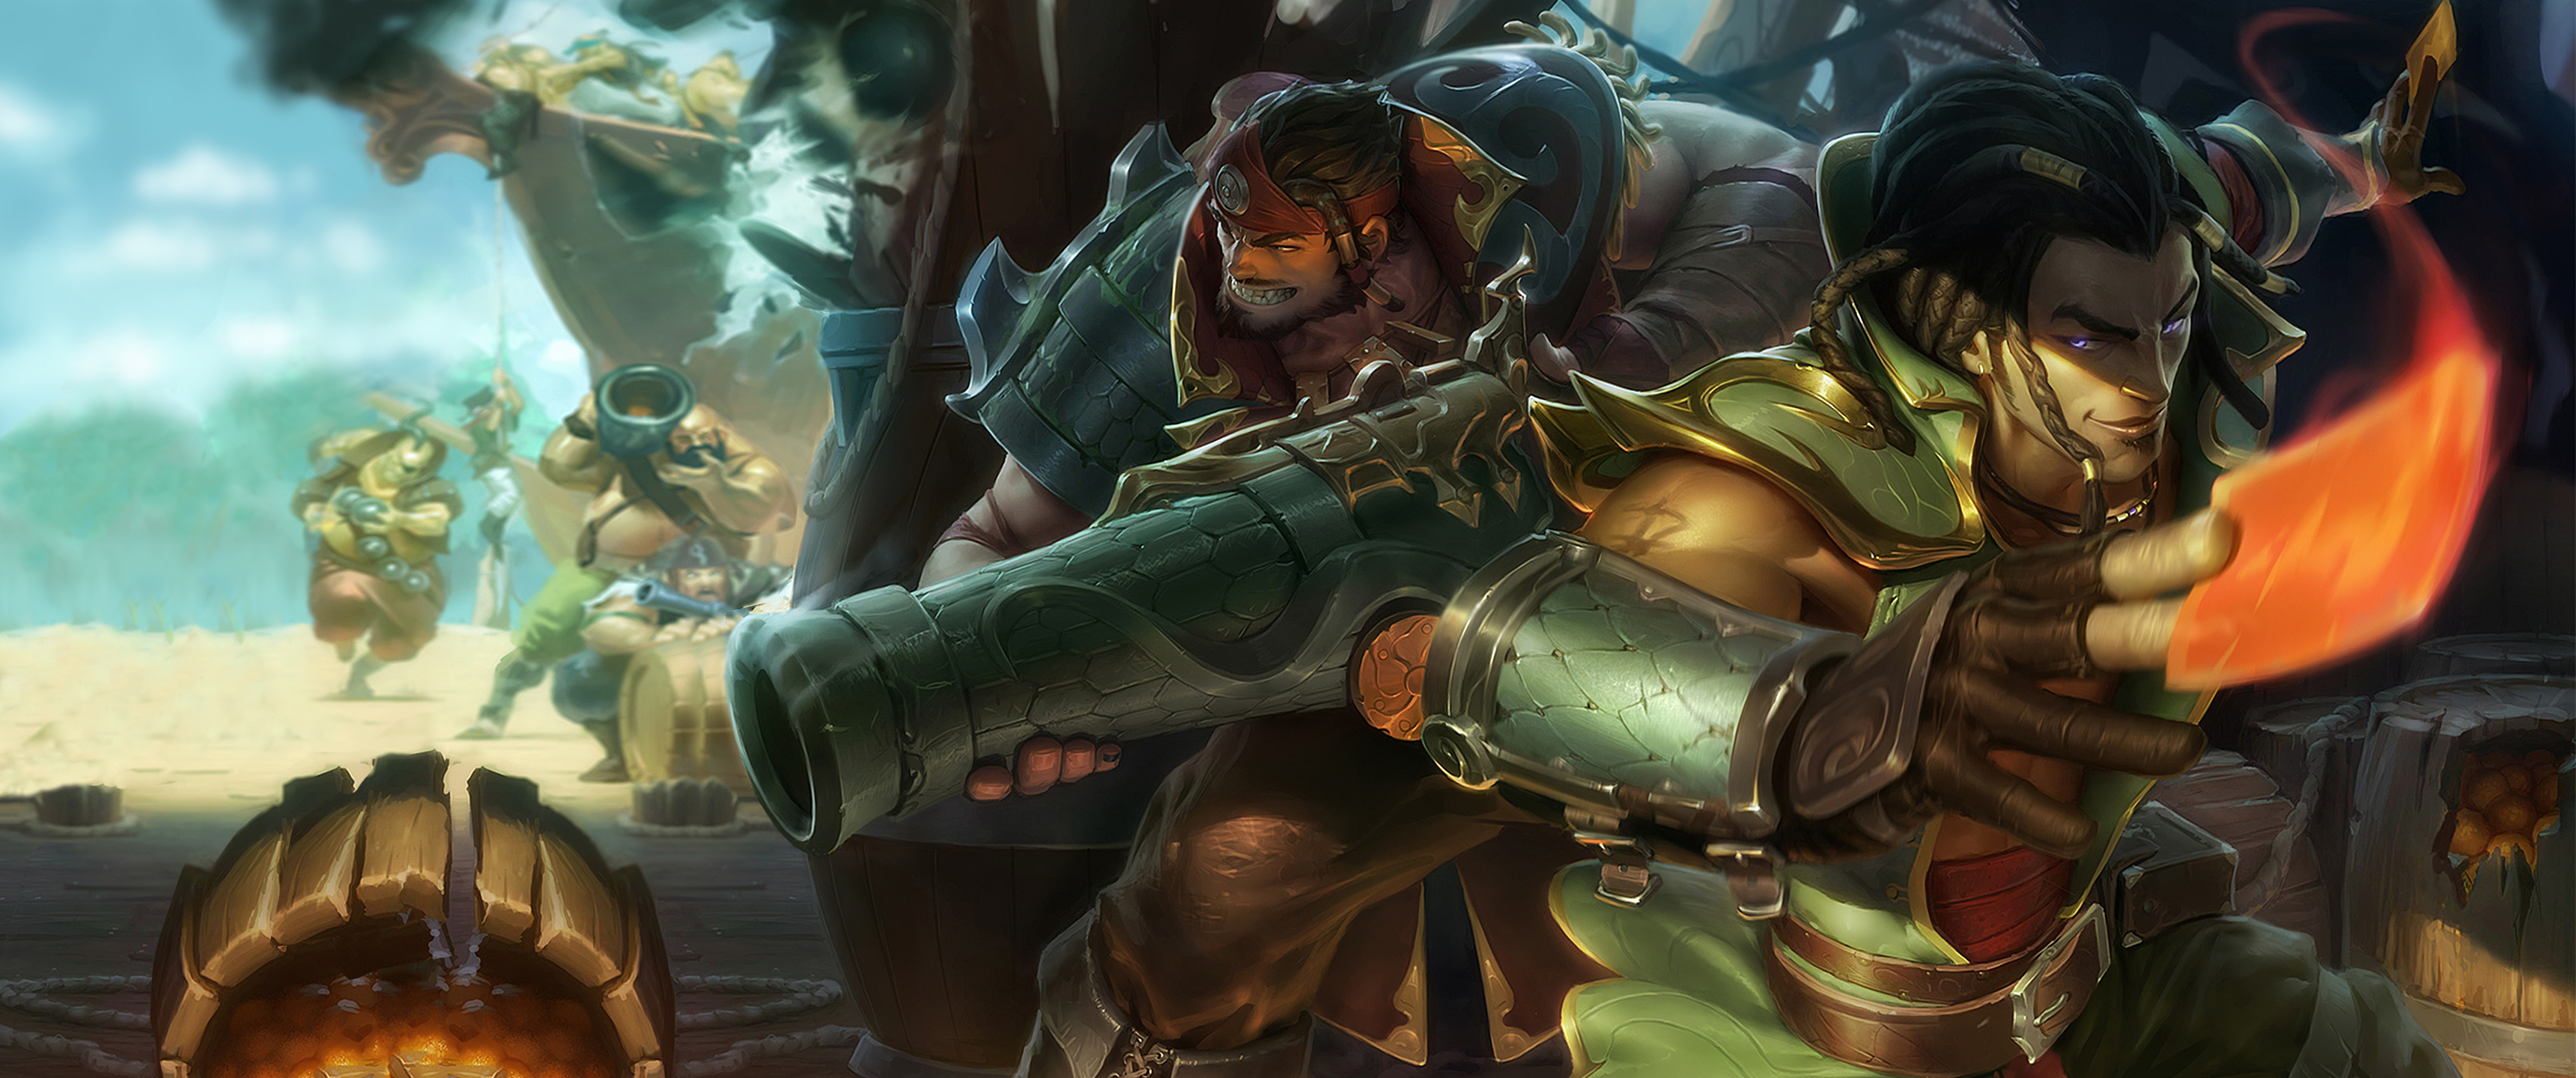 Graves League Of Legends Twisted Fate League Of Legends Pirate 3440x1440